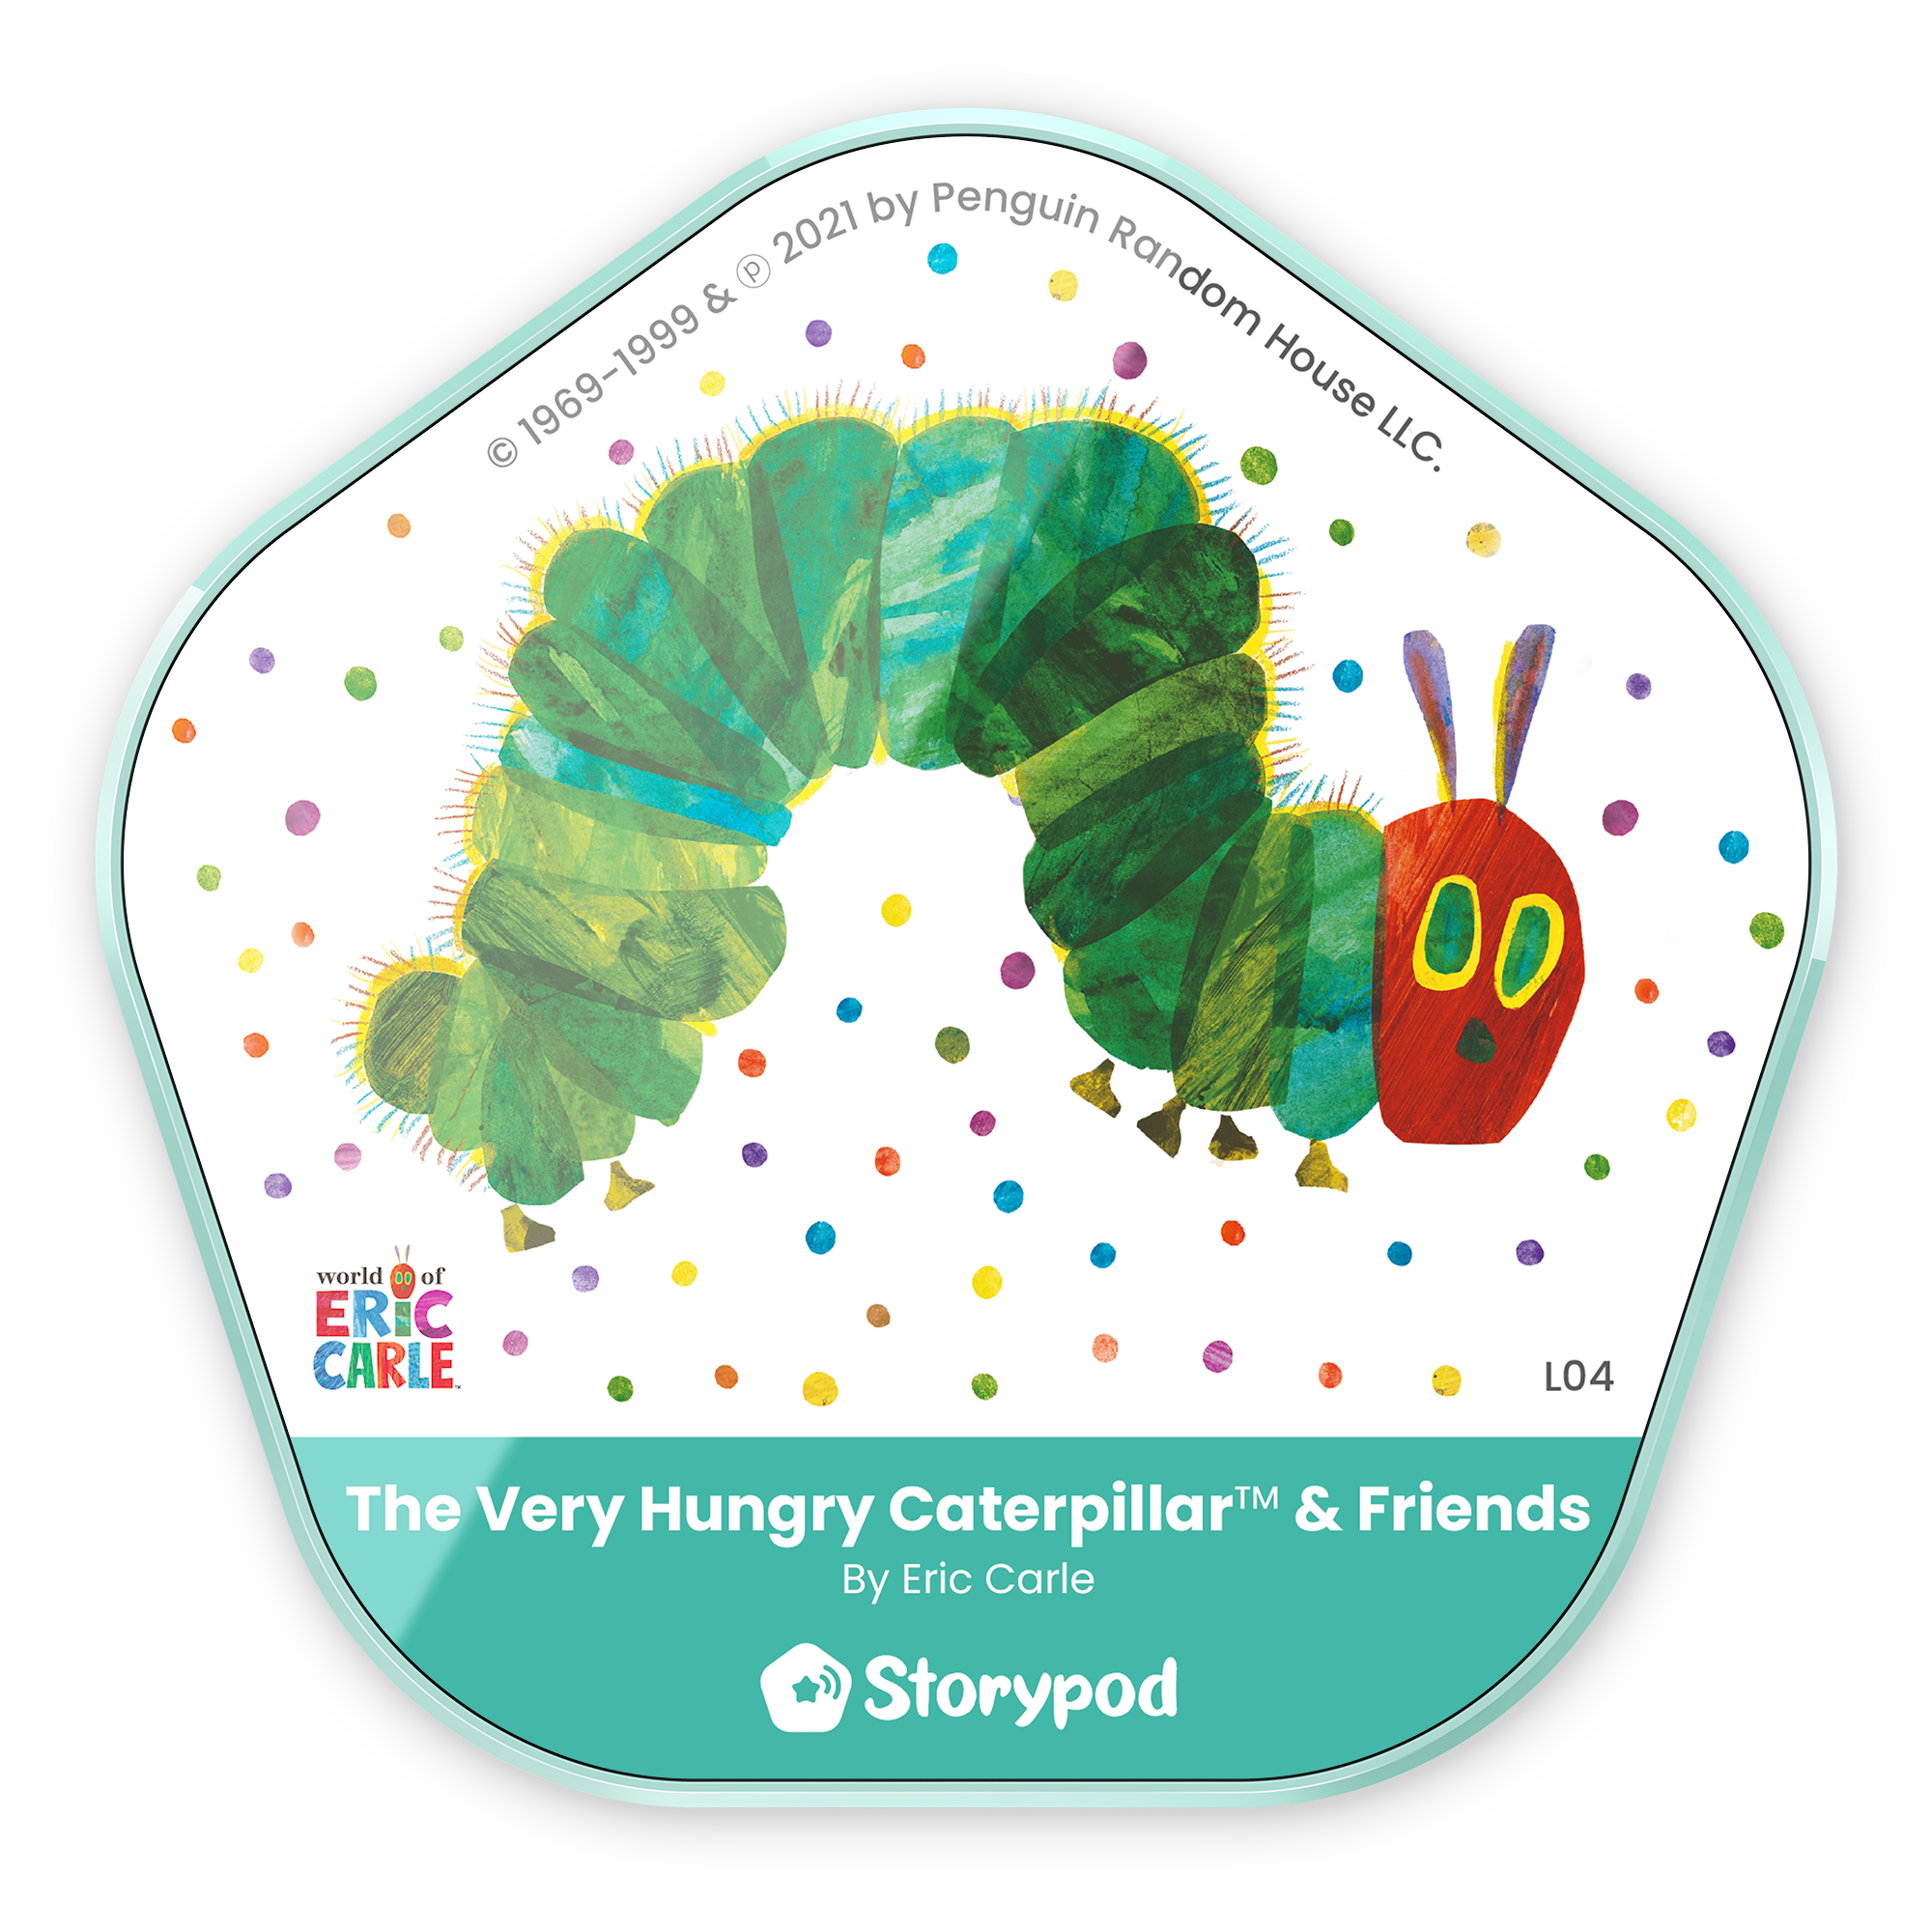 The Very Hungry Caterpillar™ & Friends